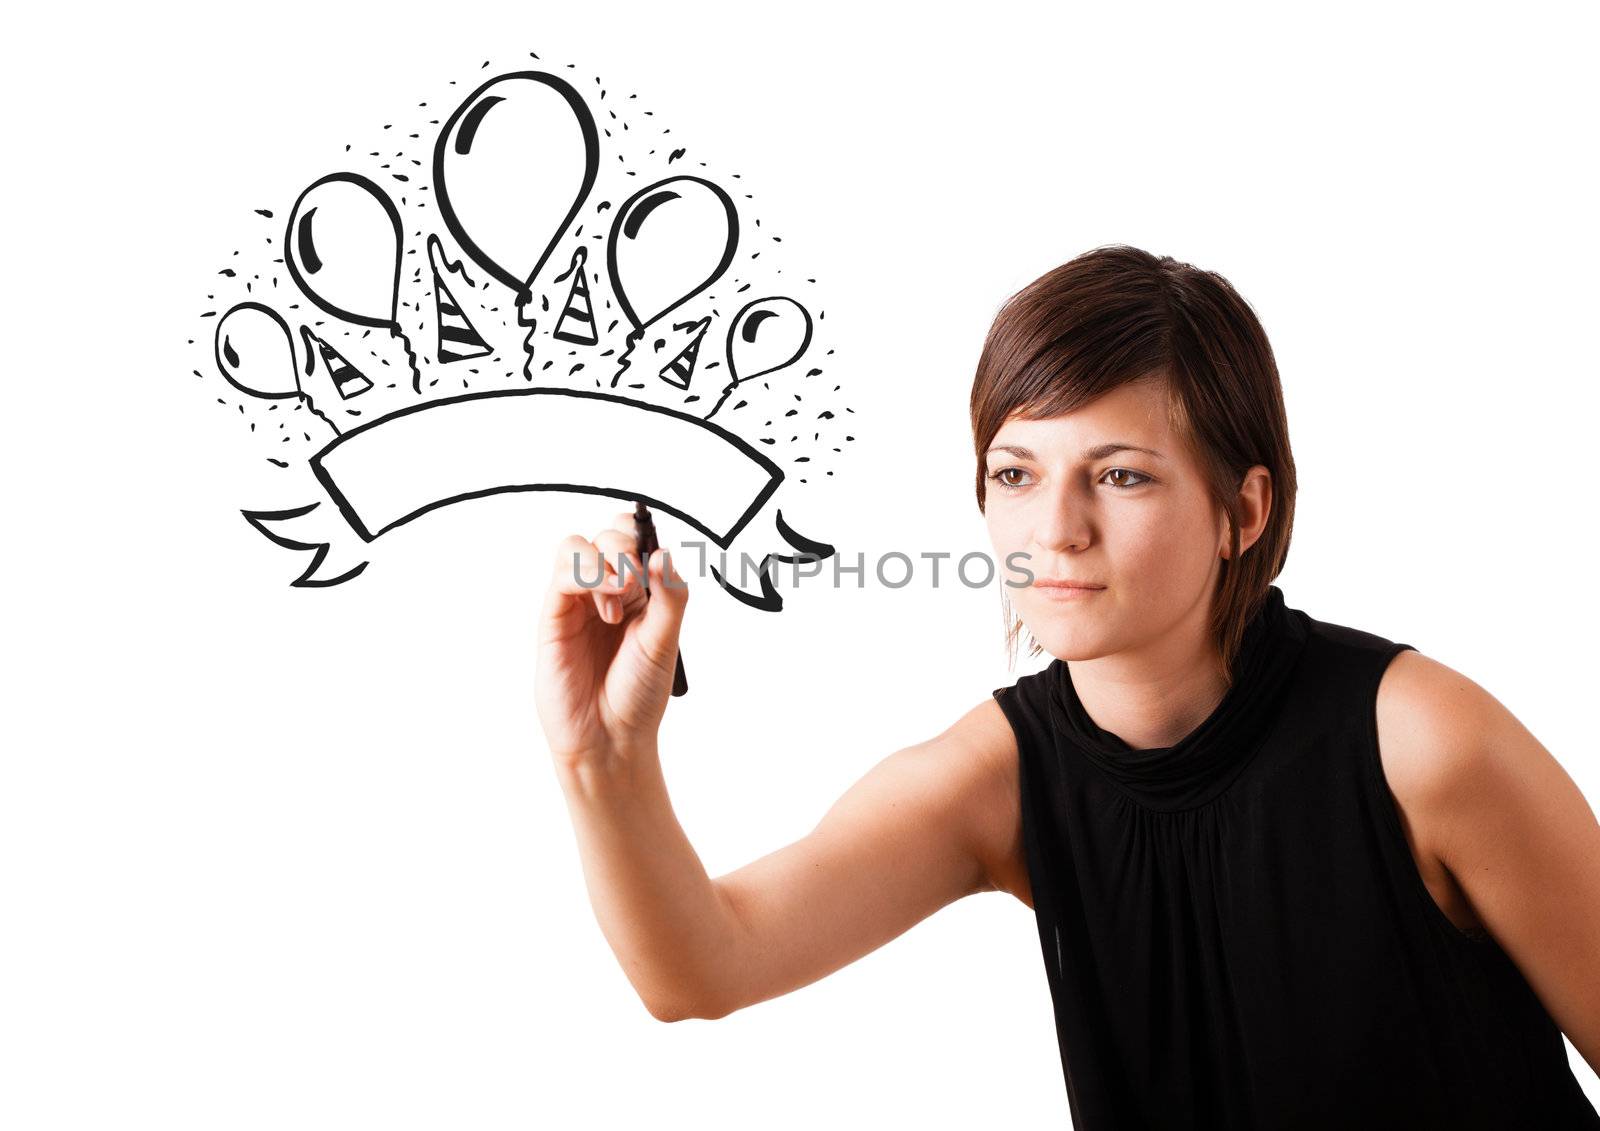 Young girl drawing a party label on whiteboard by ra2studio